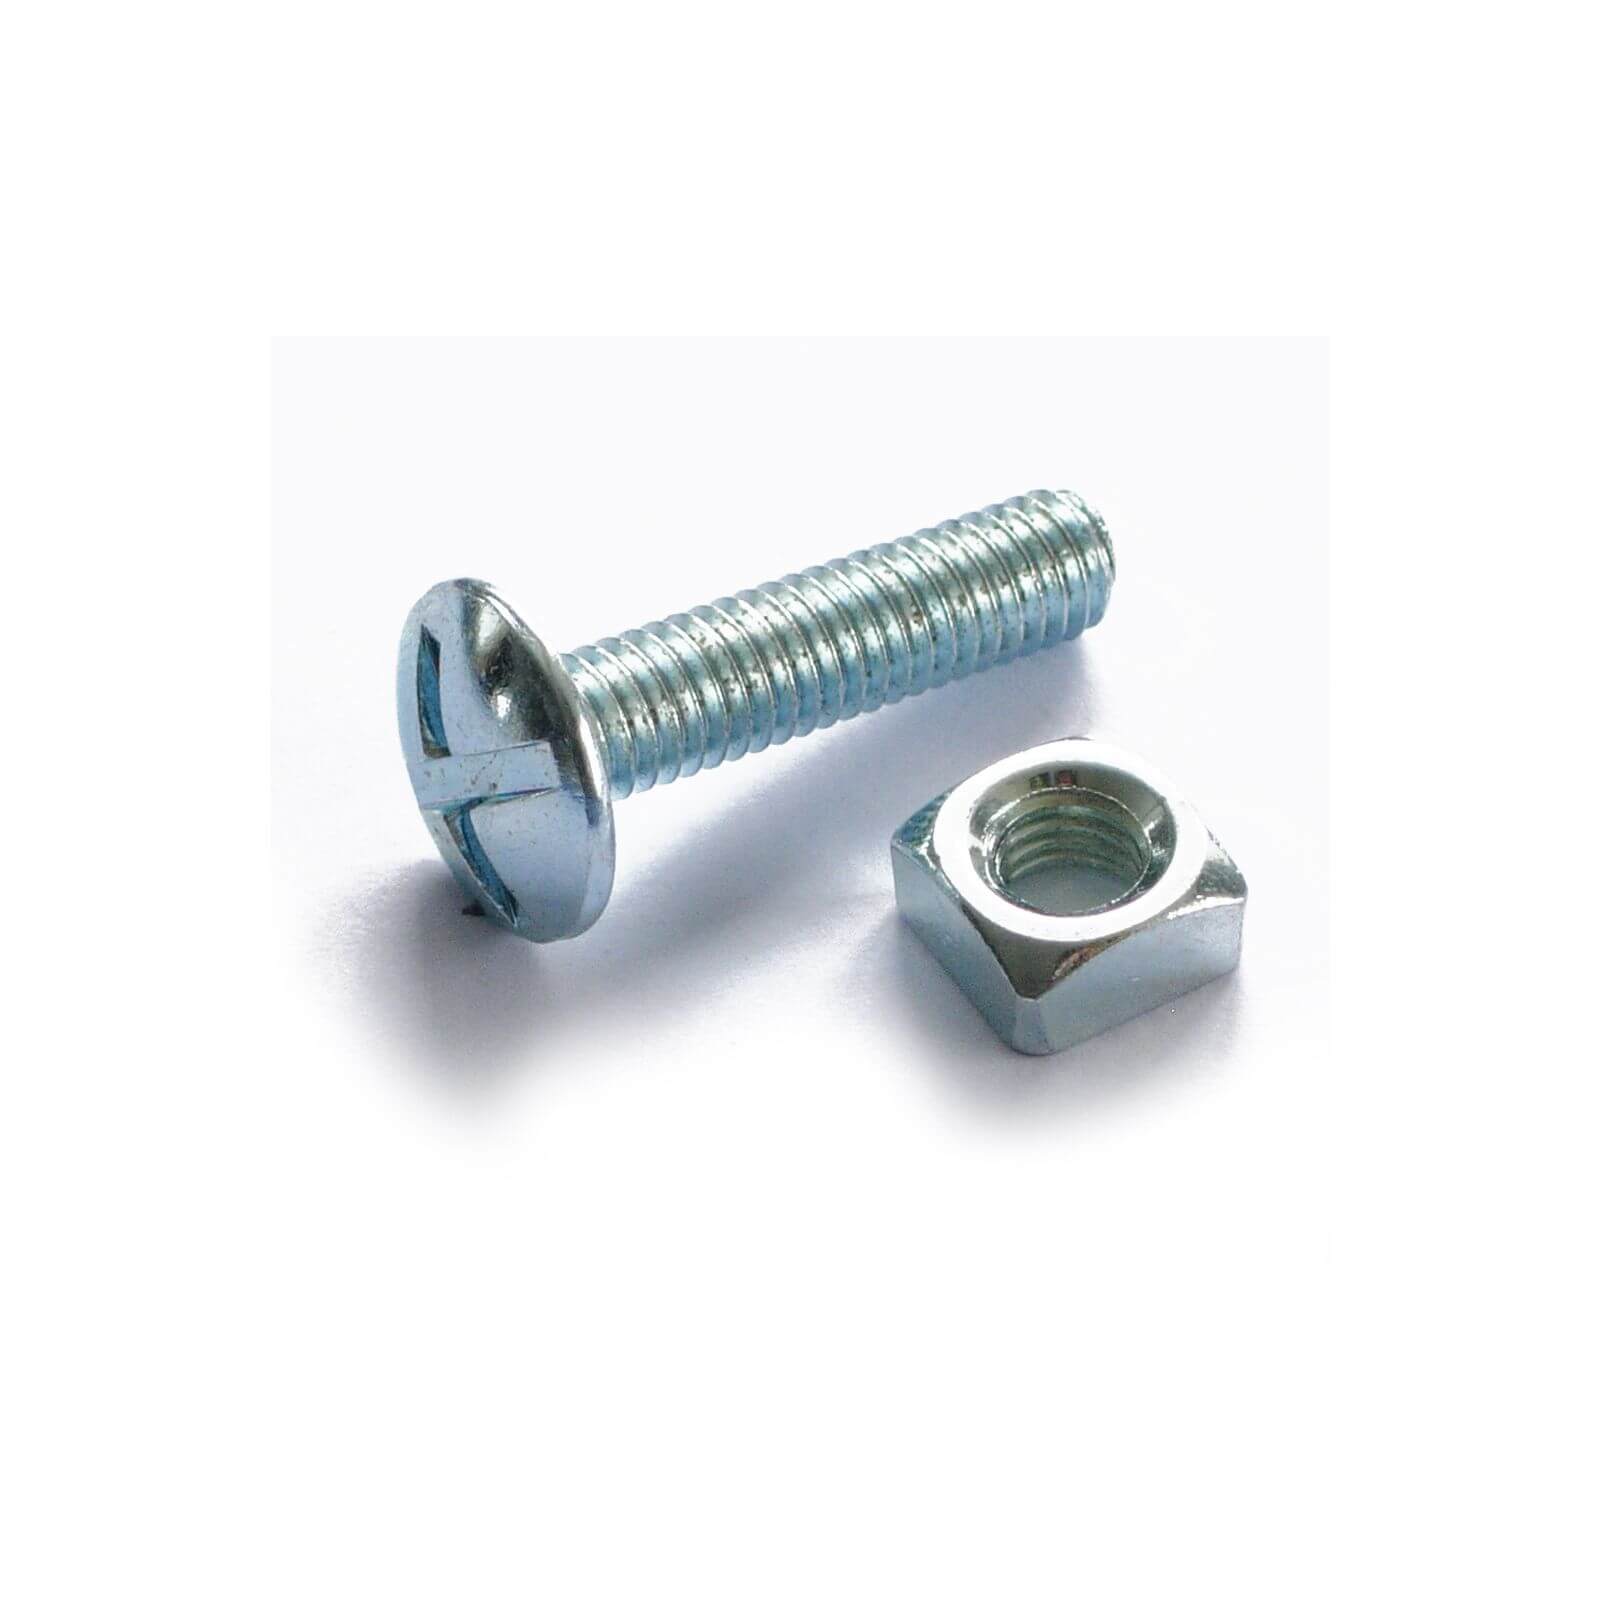 Roofing Bolt - Bright Zinc Plated - M6 100mm - 5 Pack